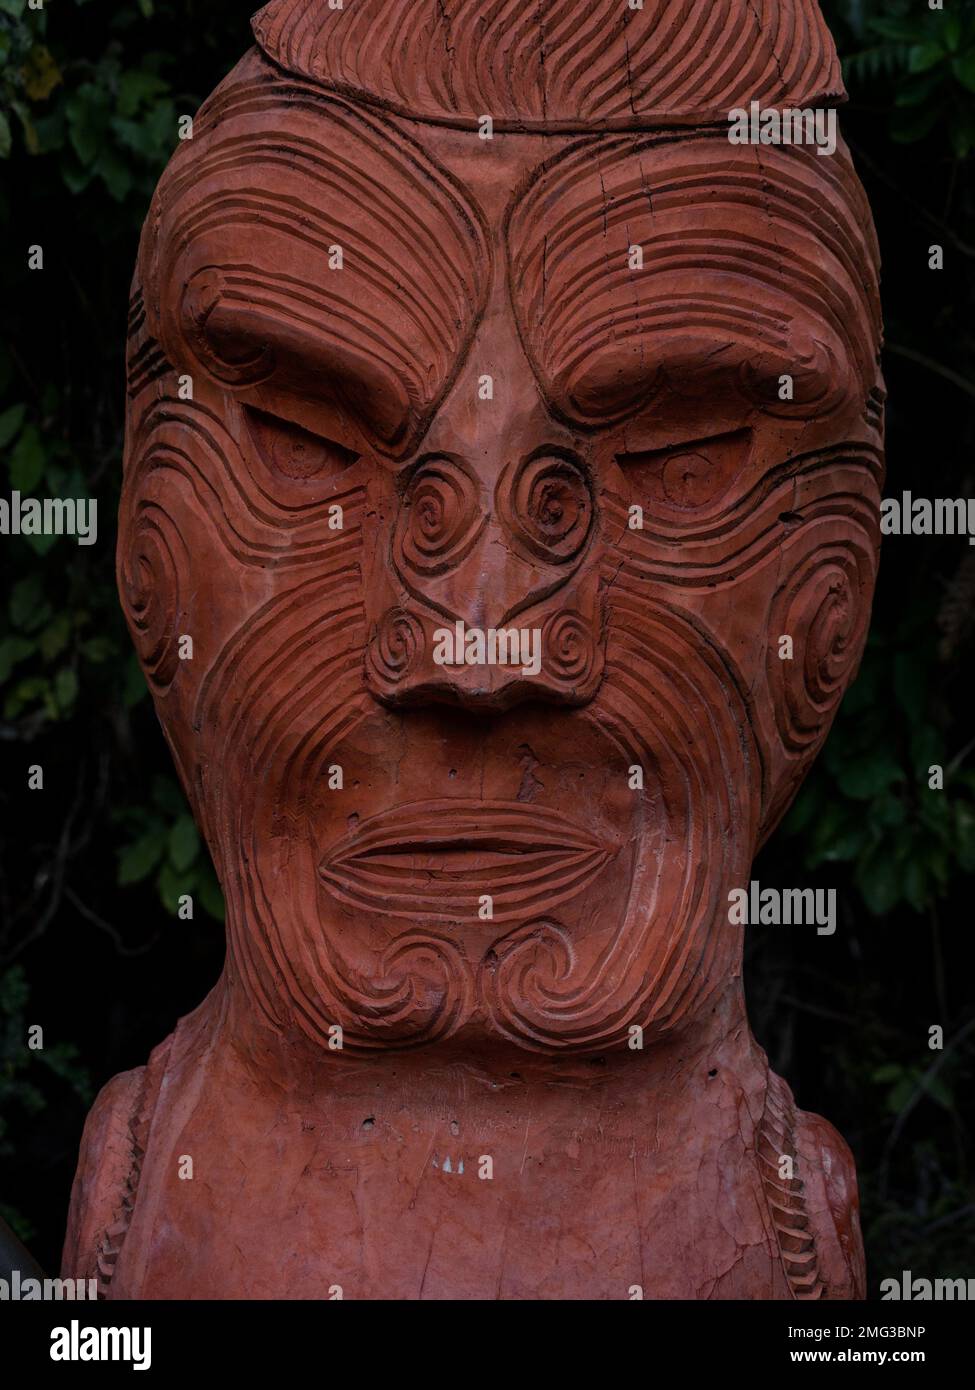 Close up portrait of traditional ancient red wooden Maori sculpture figure in Abel Tasman National Park Nelson Tasman South Island of New Zealand Stock Photo